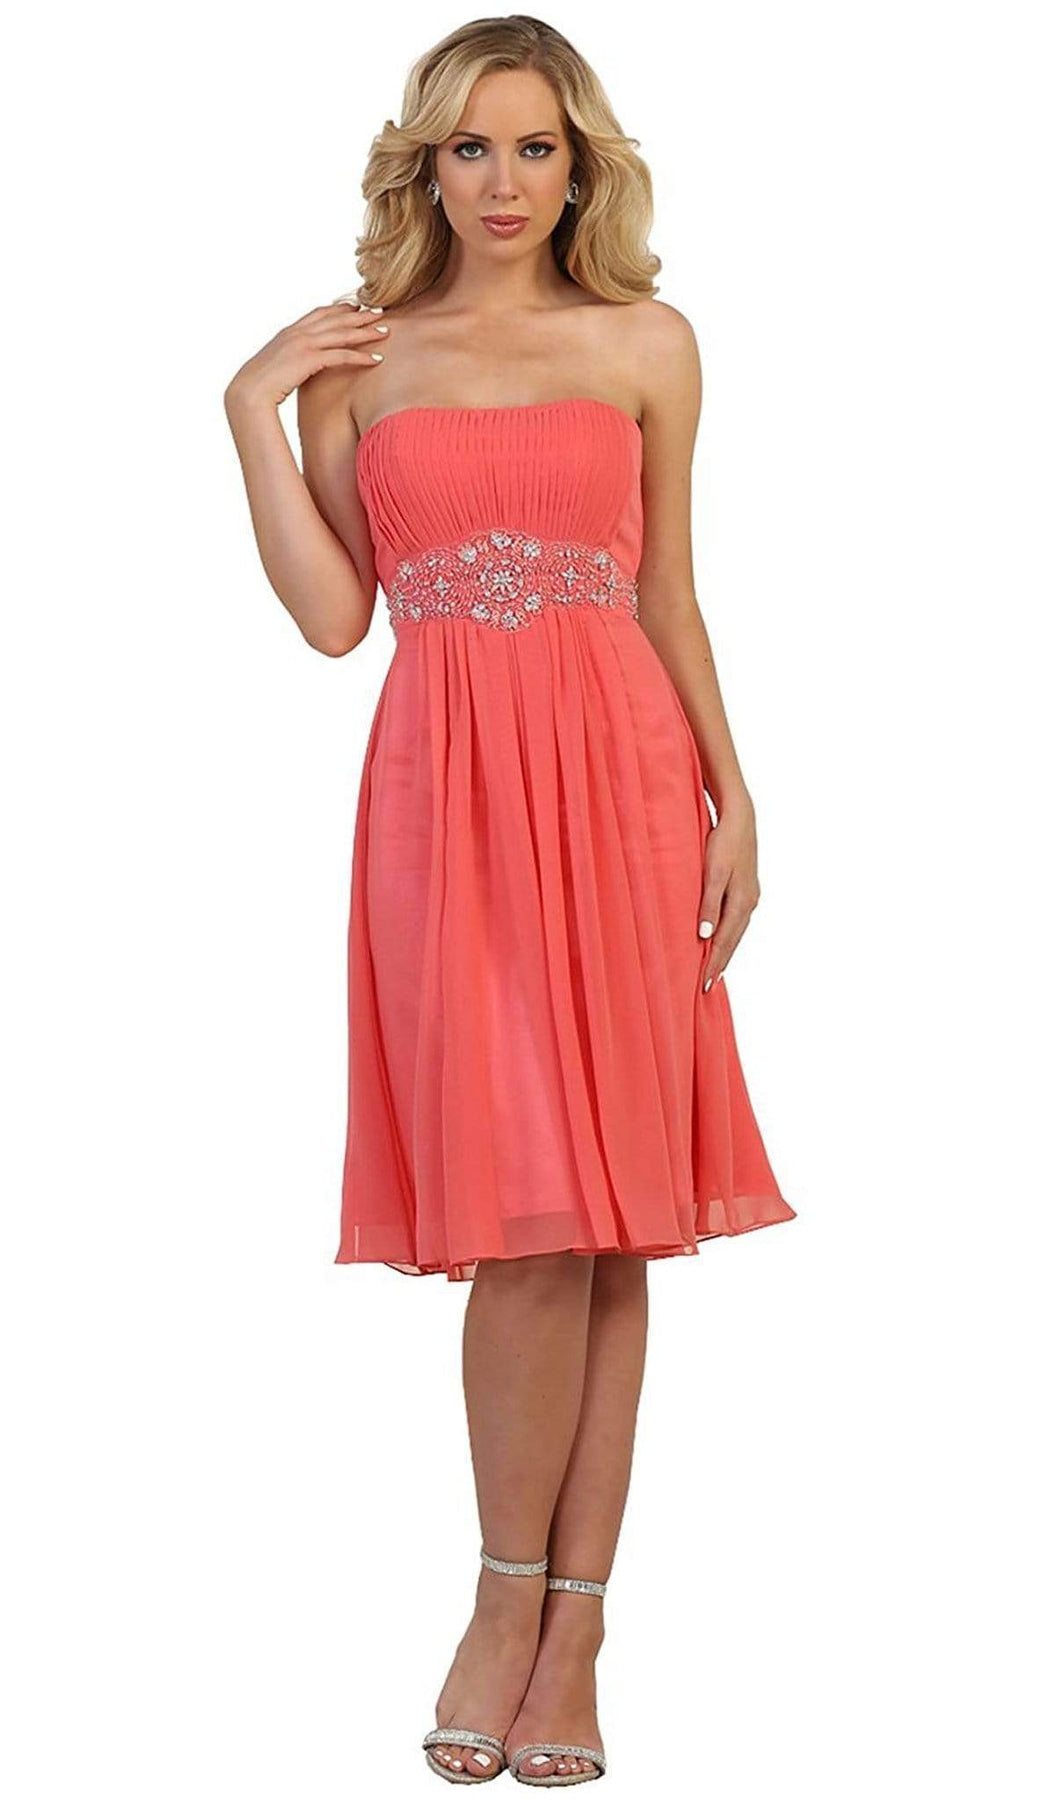 May Queen - MQ711B Pleated Sweetheart Bejeweled Waist Cocktail Dress Special Occasion Dress 22 / Fuchsia